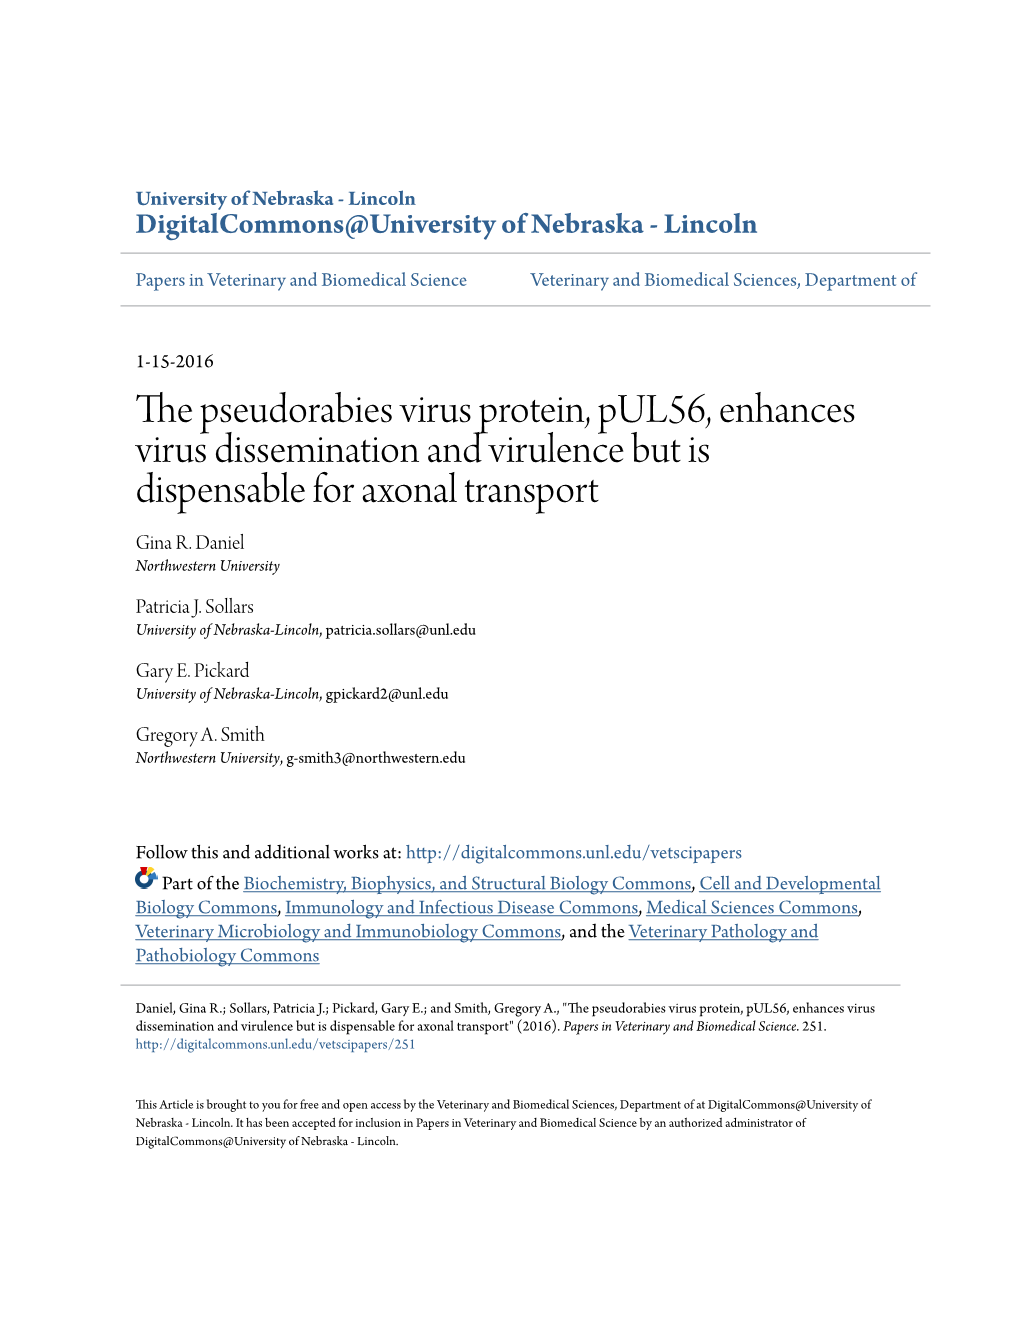 The Pseudorabies Virus Protein, Pul56, Enhances Virus Dissemination and Virulence but Is Dispensable for Axonal Transport" (2016)